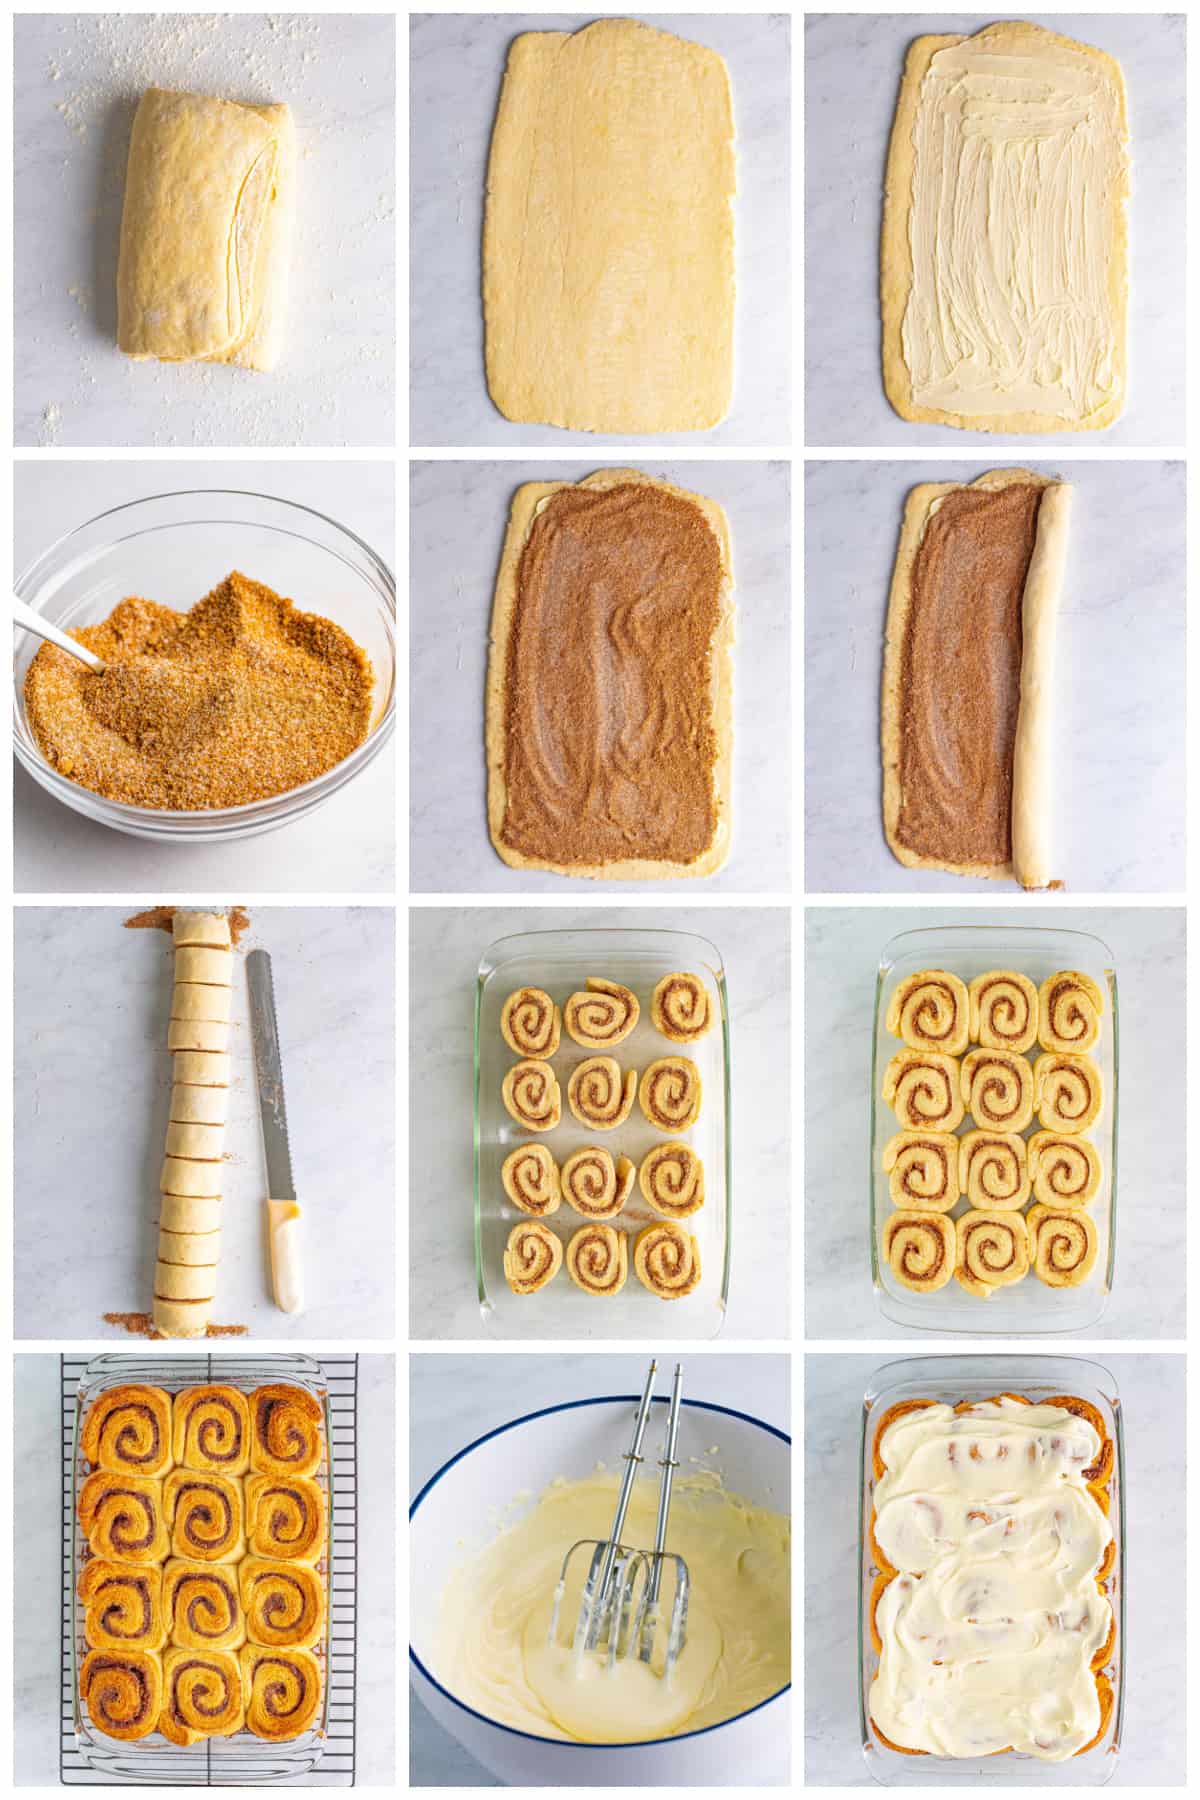 Step by step photos on how to assemble the Cinnamon Rolls.